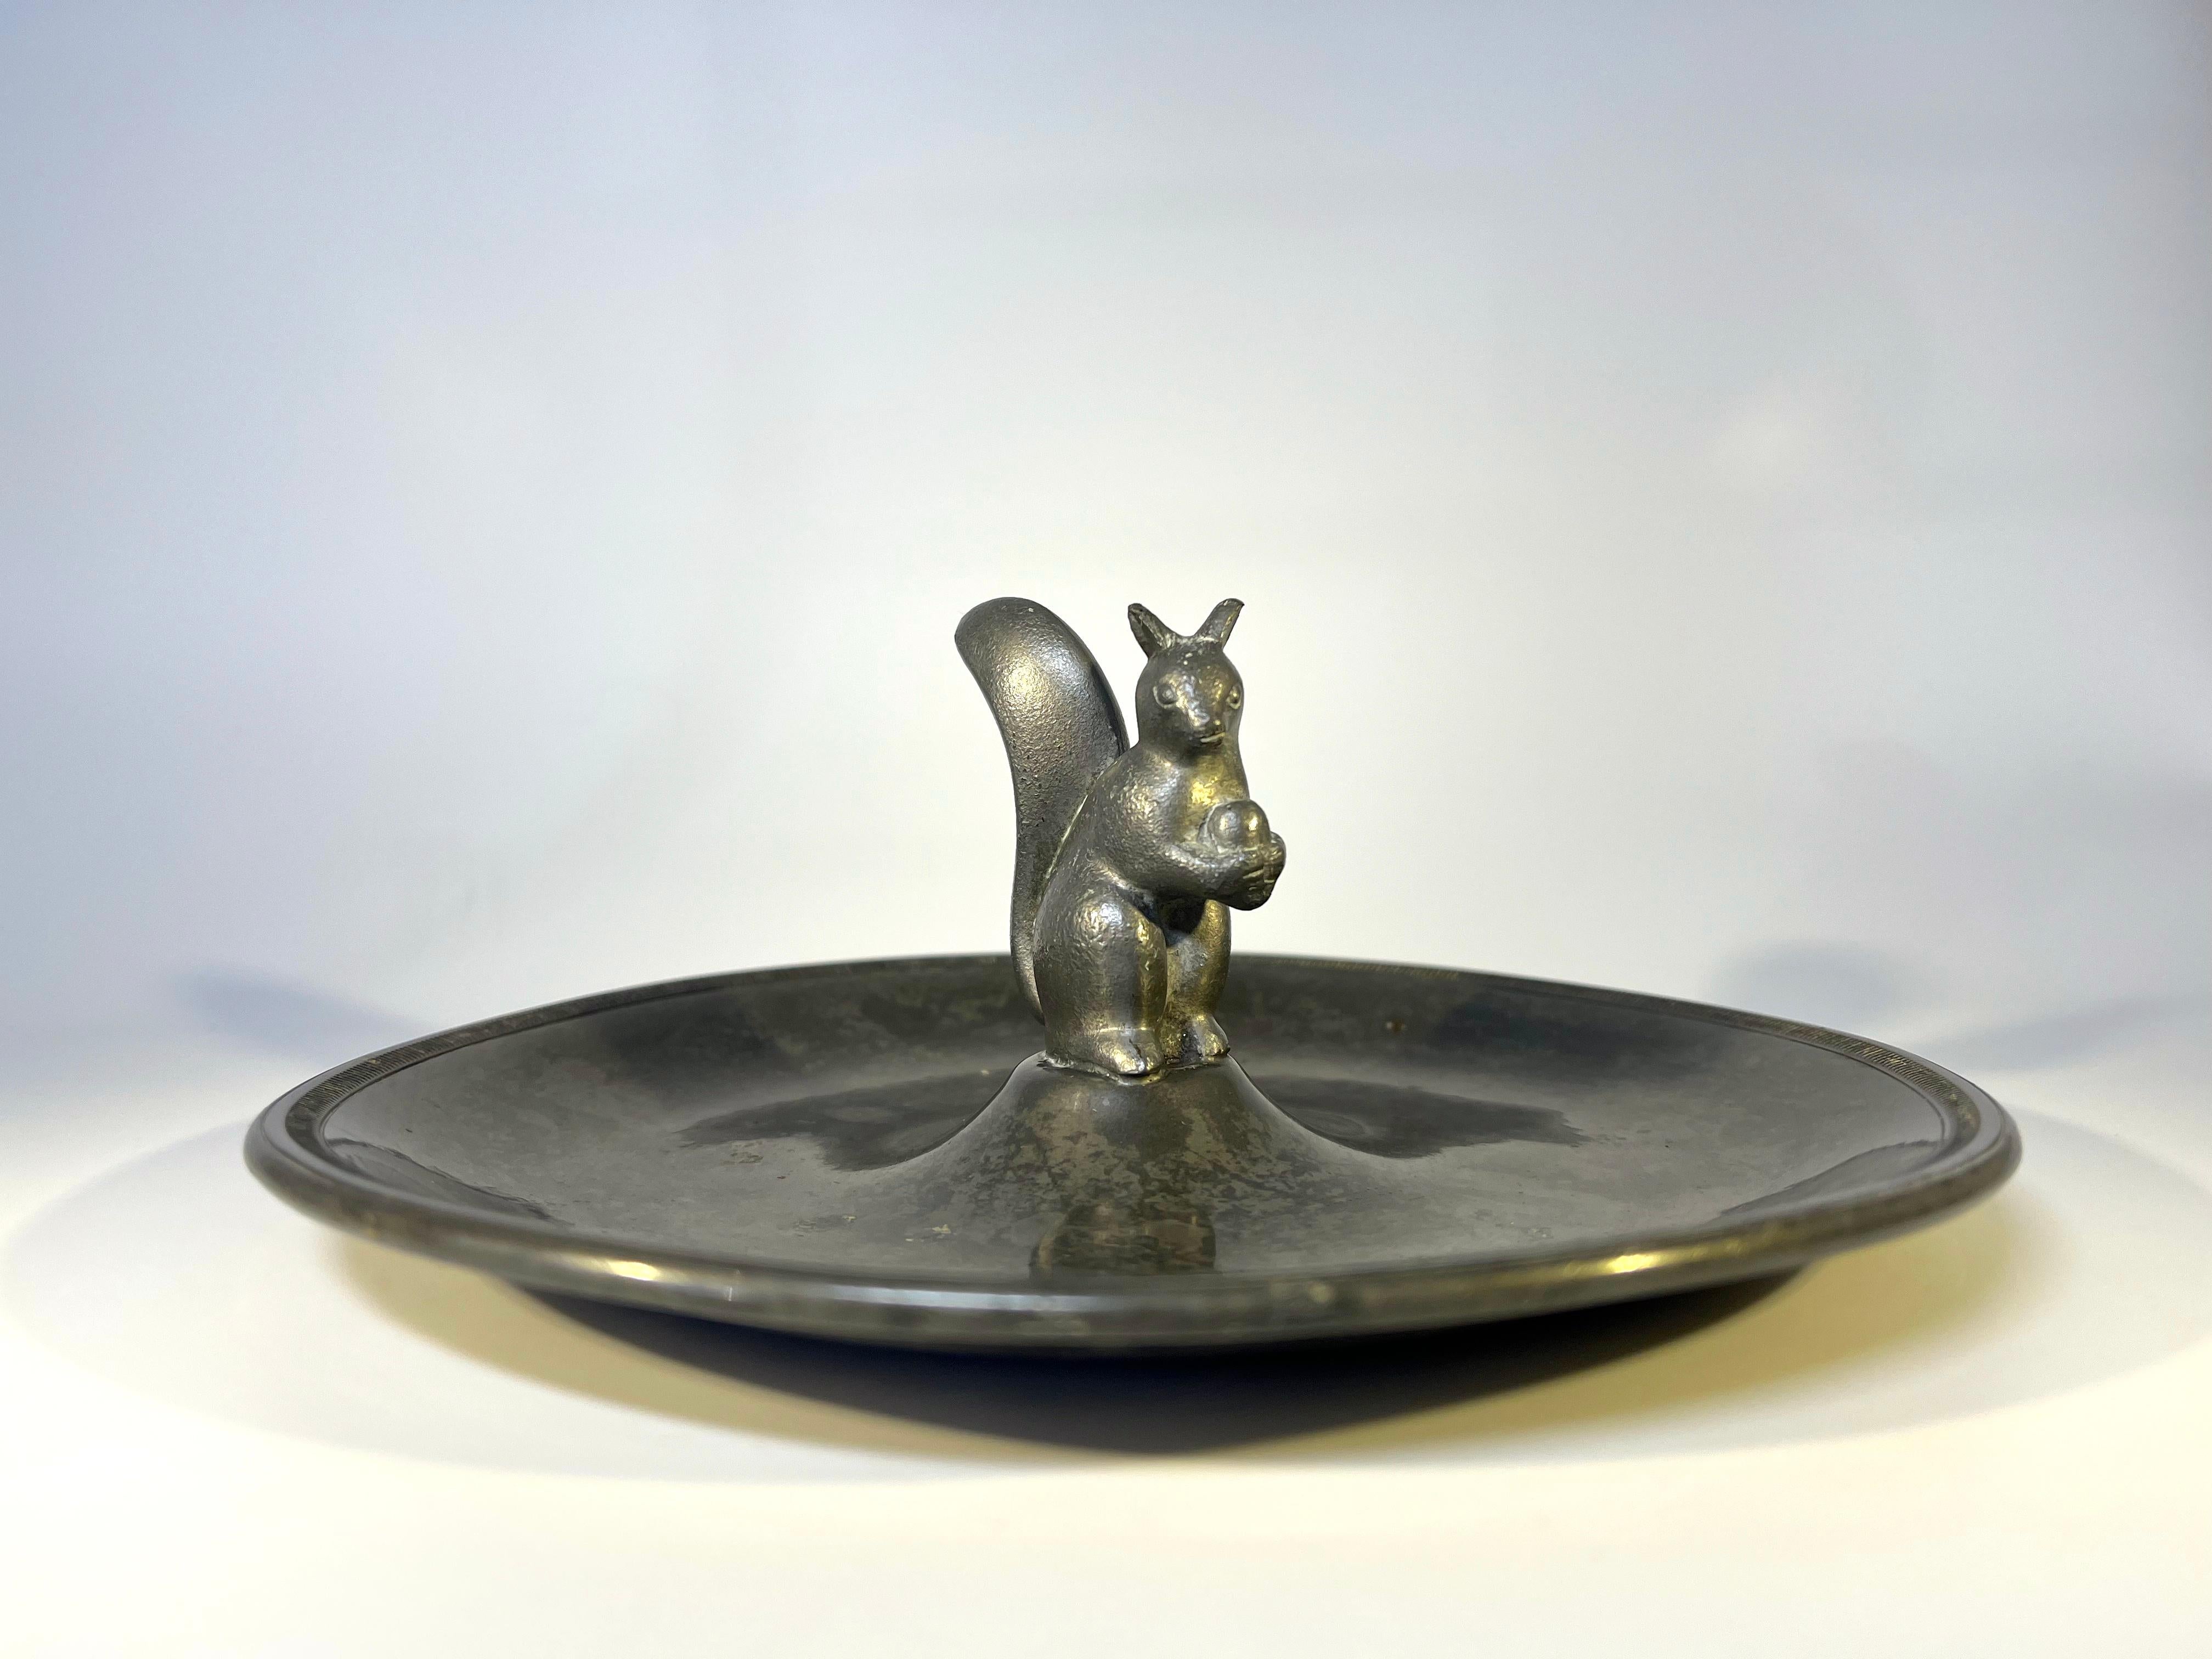 Just Andersen, Denmark 1930s Art Deco pewter stylised squirrel vide poche
Circa 1930's
Stamped and numbered 829 on base
Diameter 7 inch, Height 2.5 inch
Remarkably good condition and patina. Surface wear typical of age.